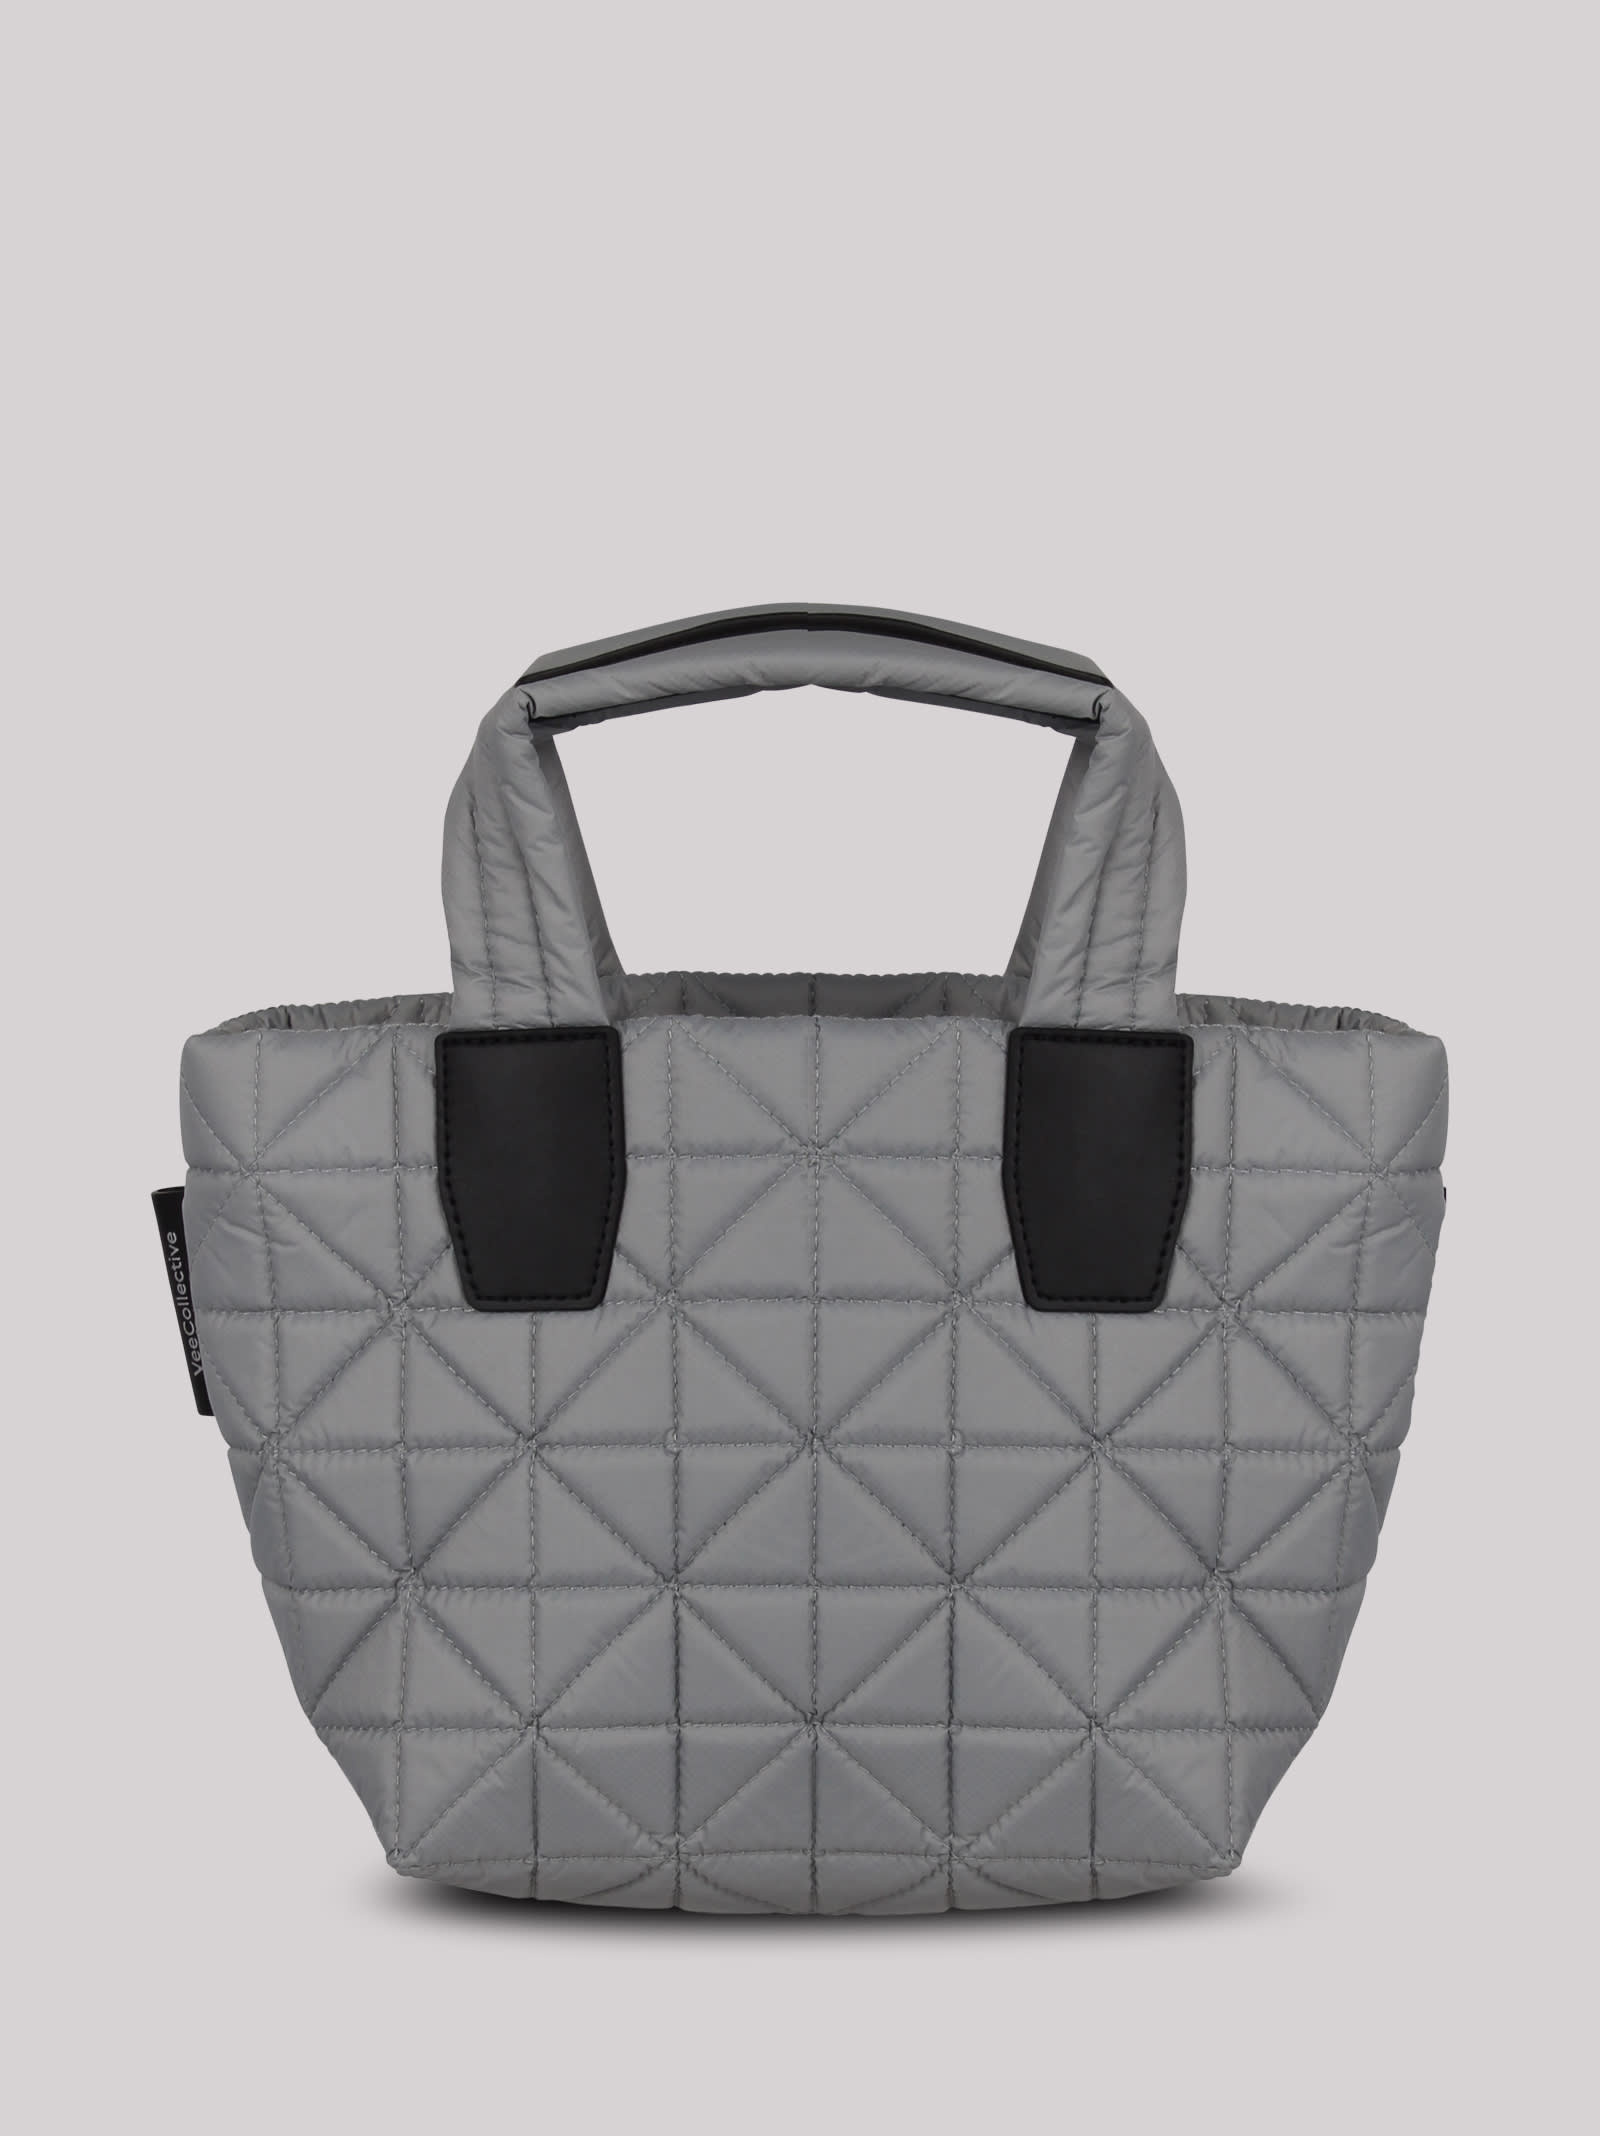 Veecollective Vee Collective Small Vee Padded Tote Bag